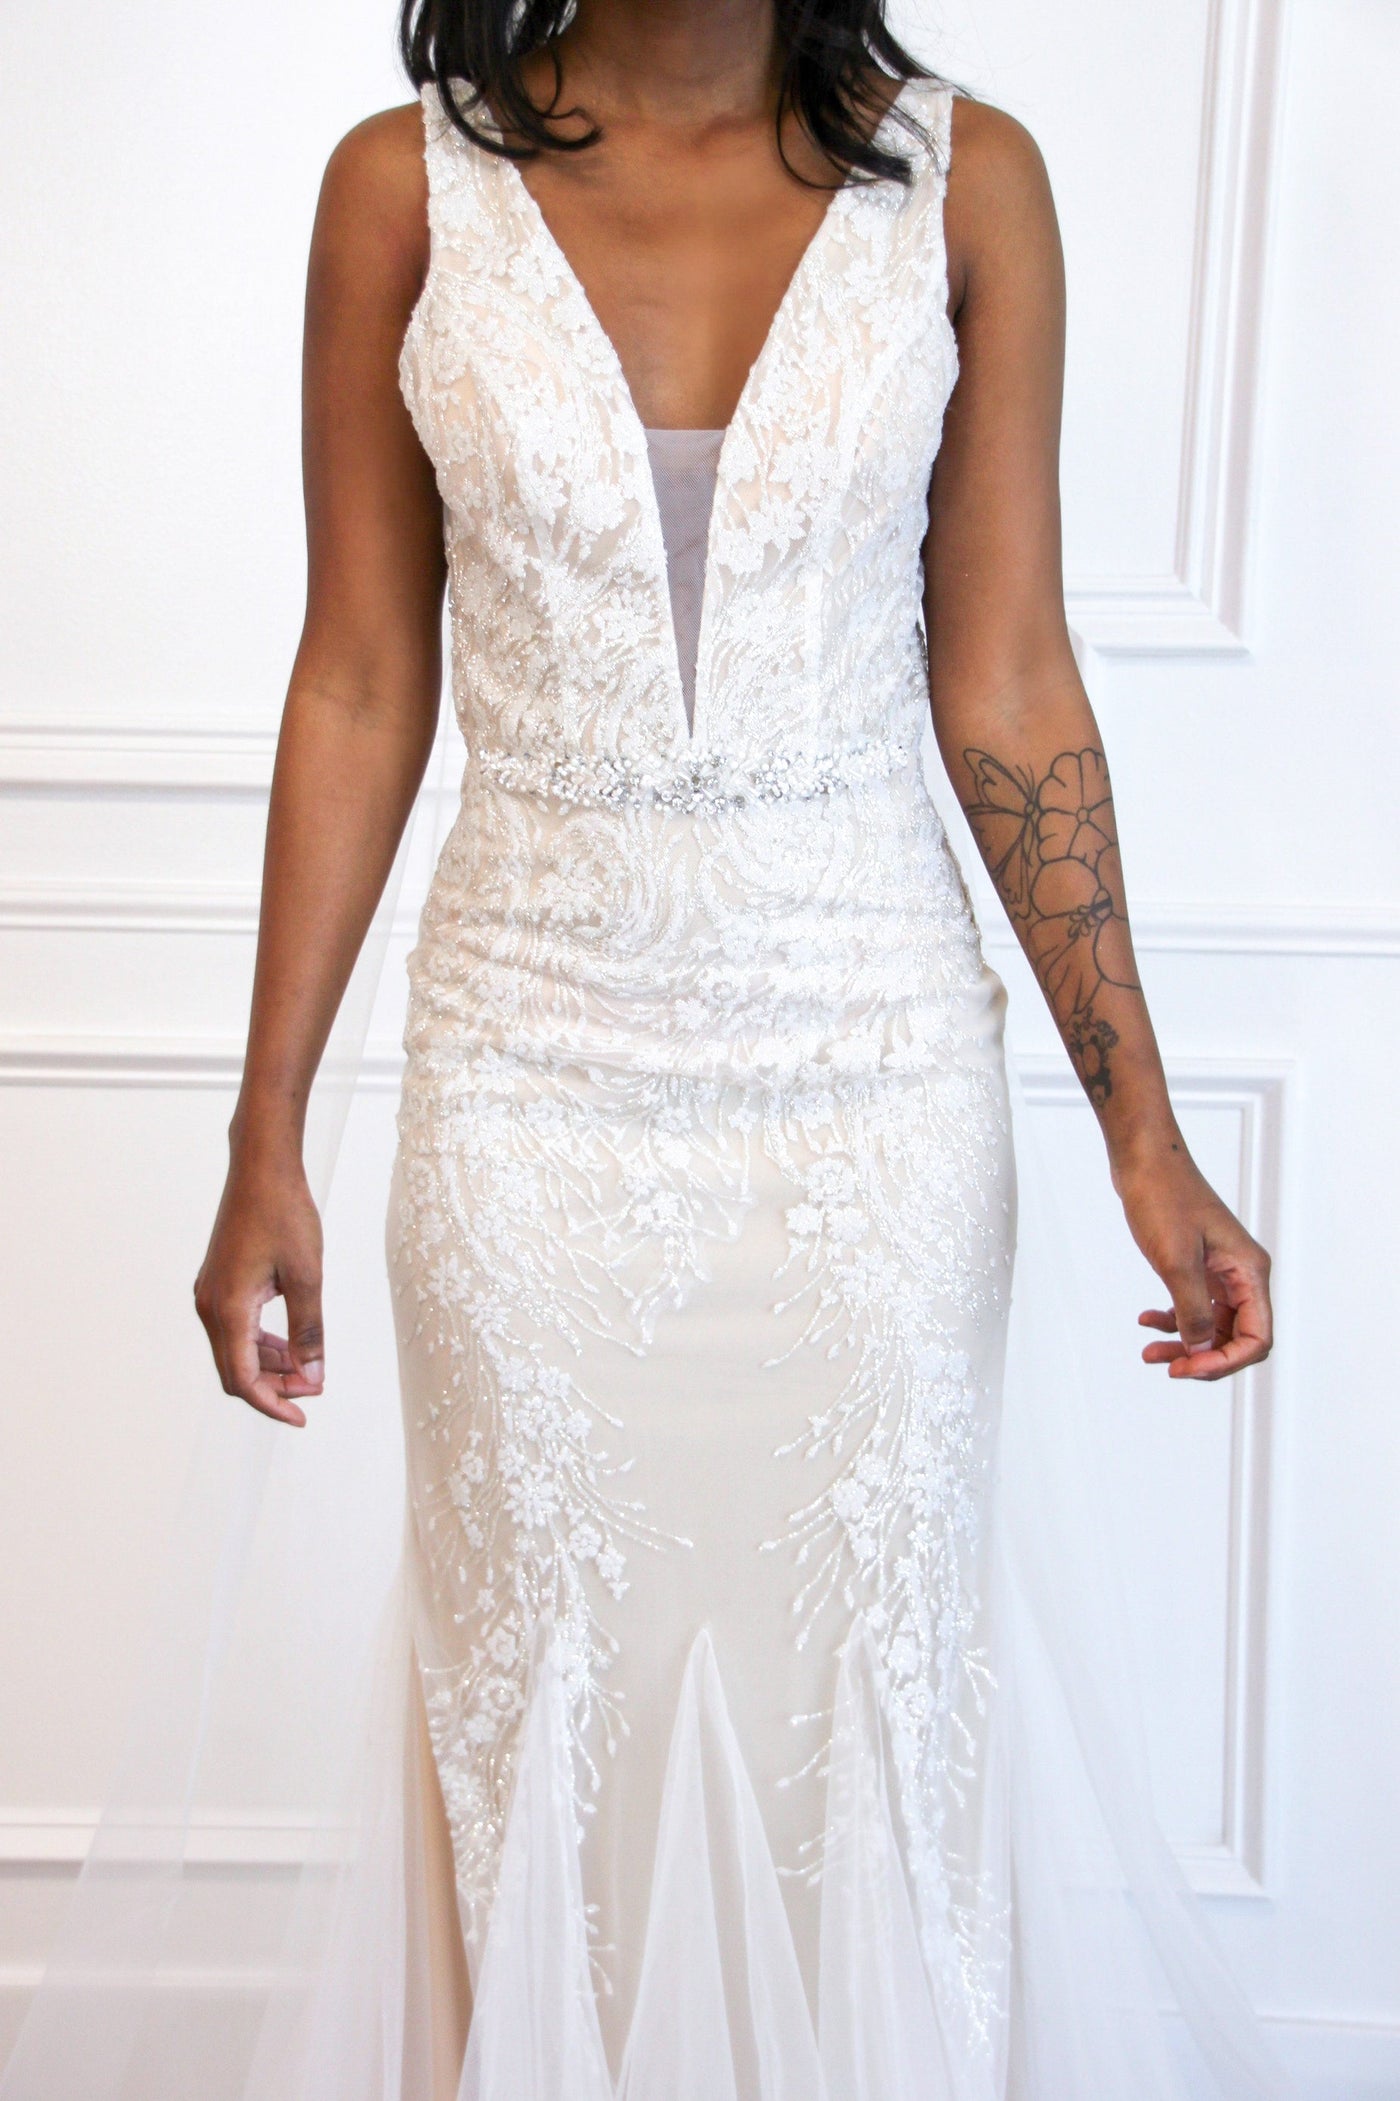 New Beginnings Embellished Wedding Dress: Ivory/Champagne - Bella and Bloom Boutique